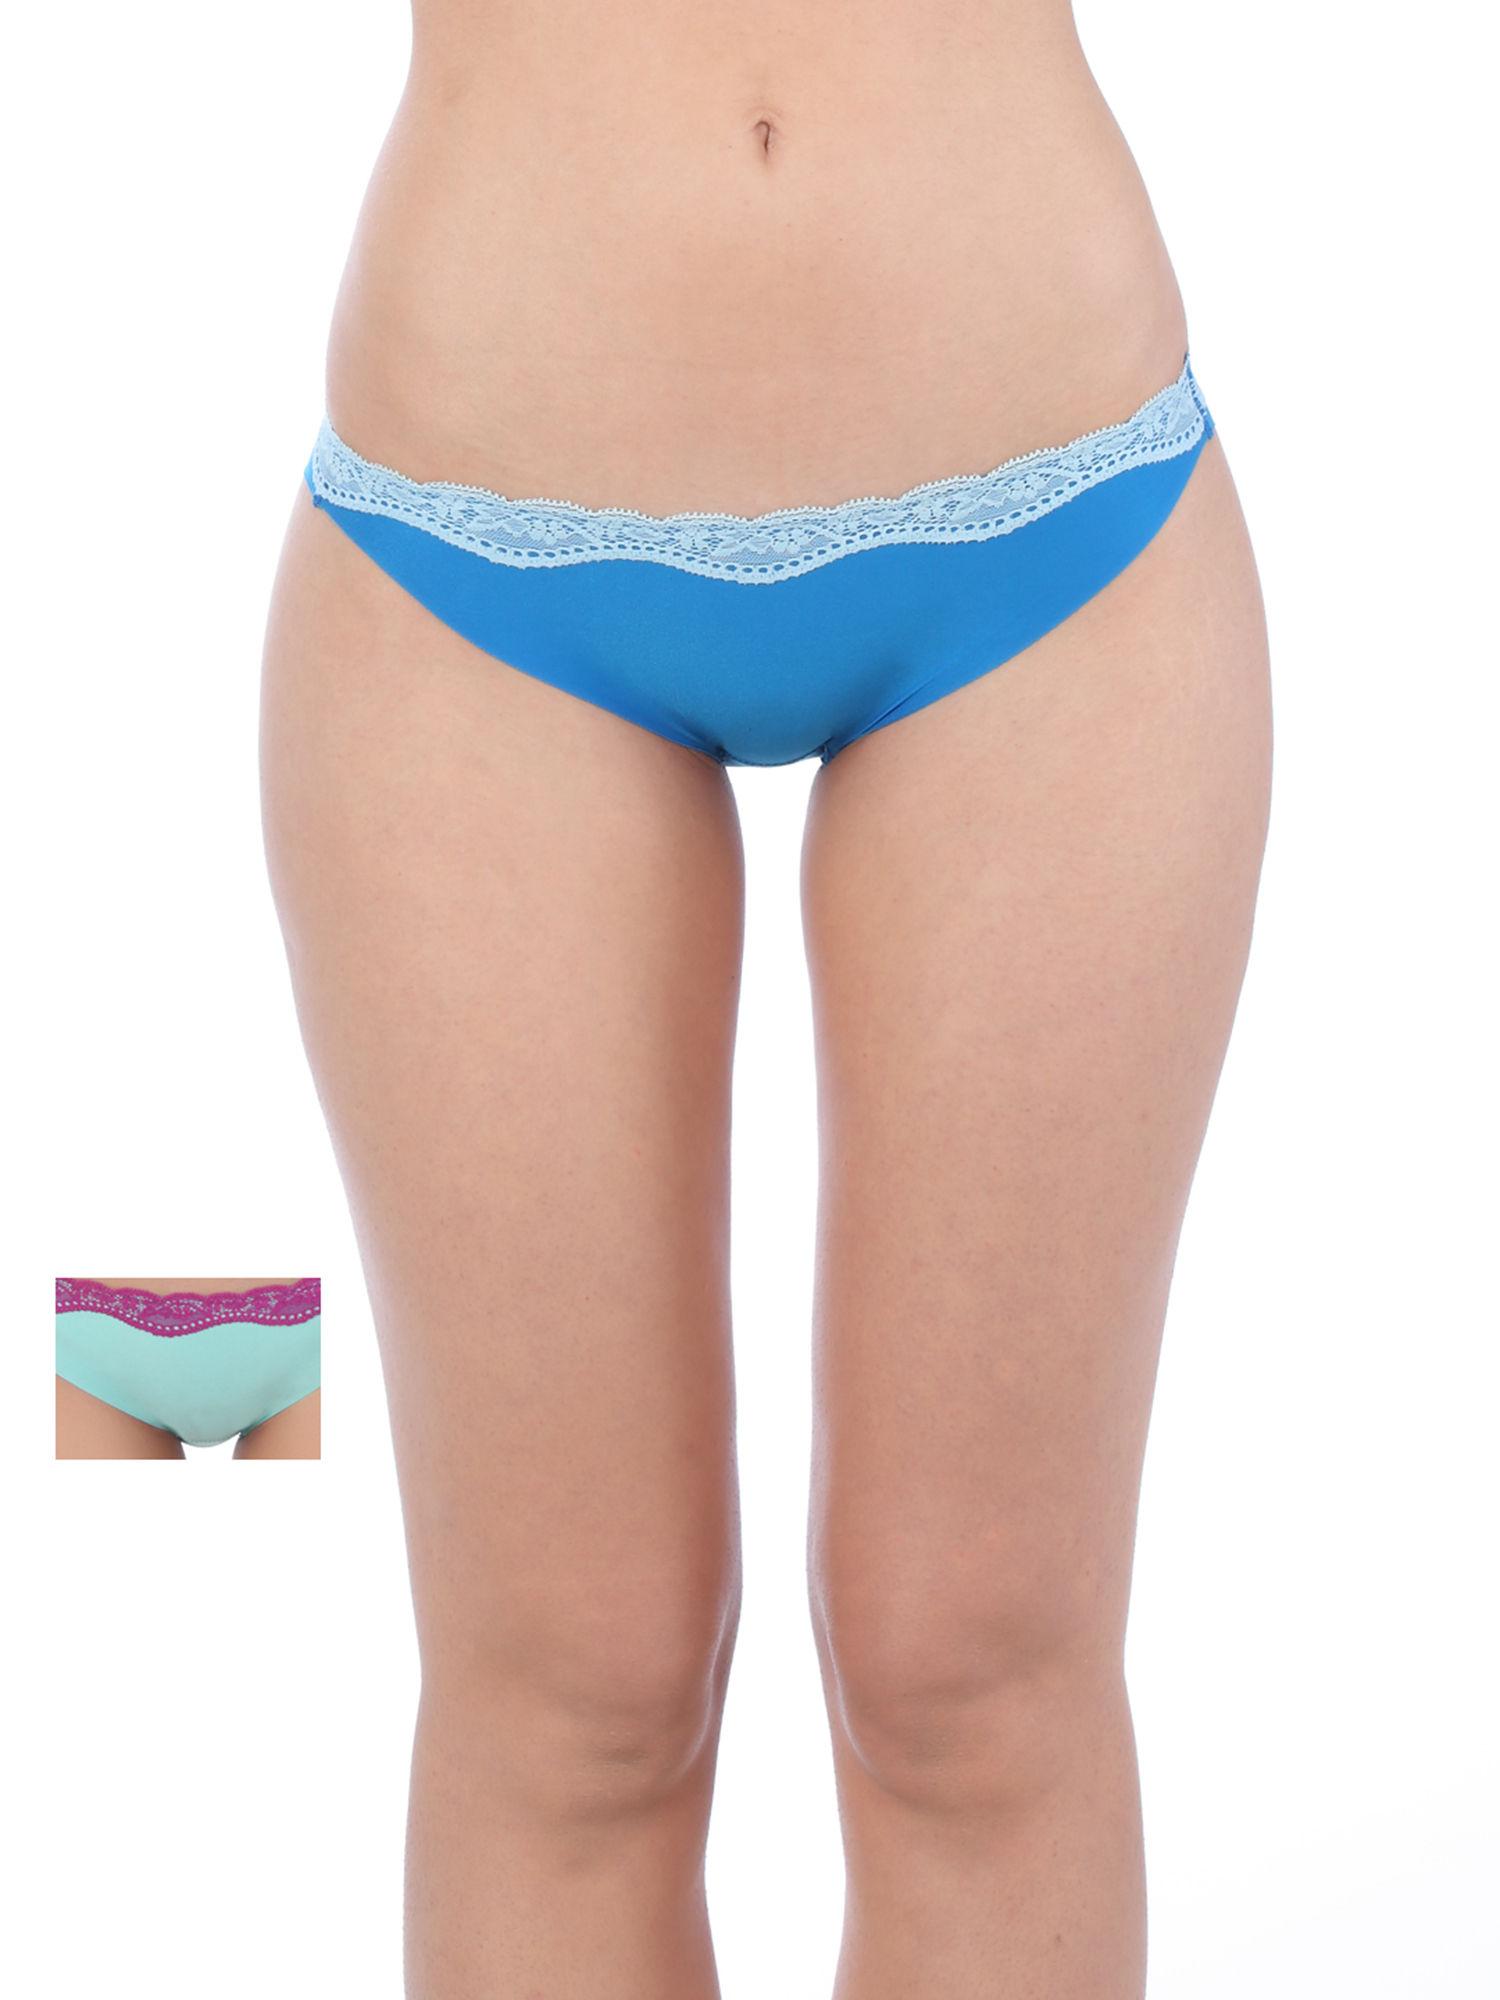 stretty 124 tanga independent everyday lace brief - pack of 2 - multi-color